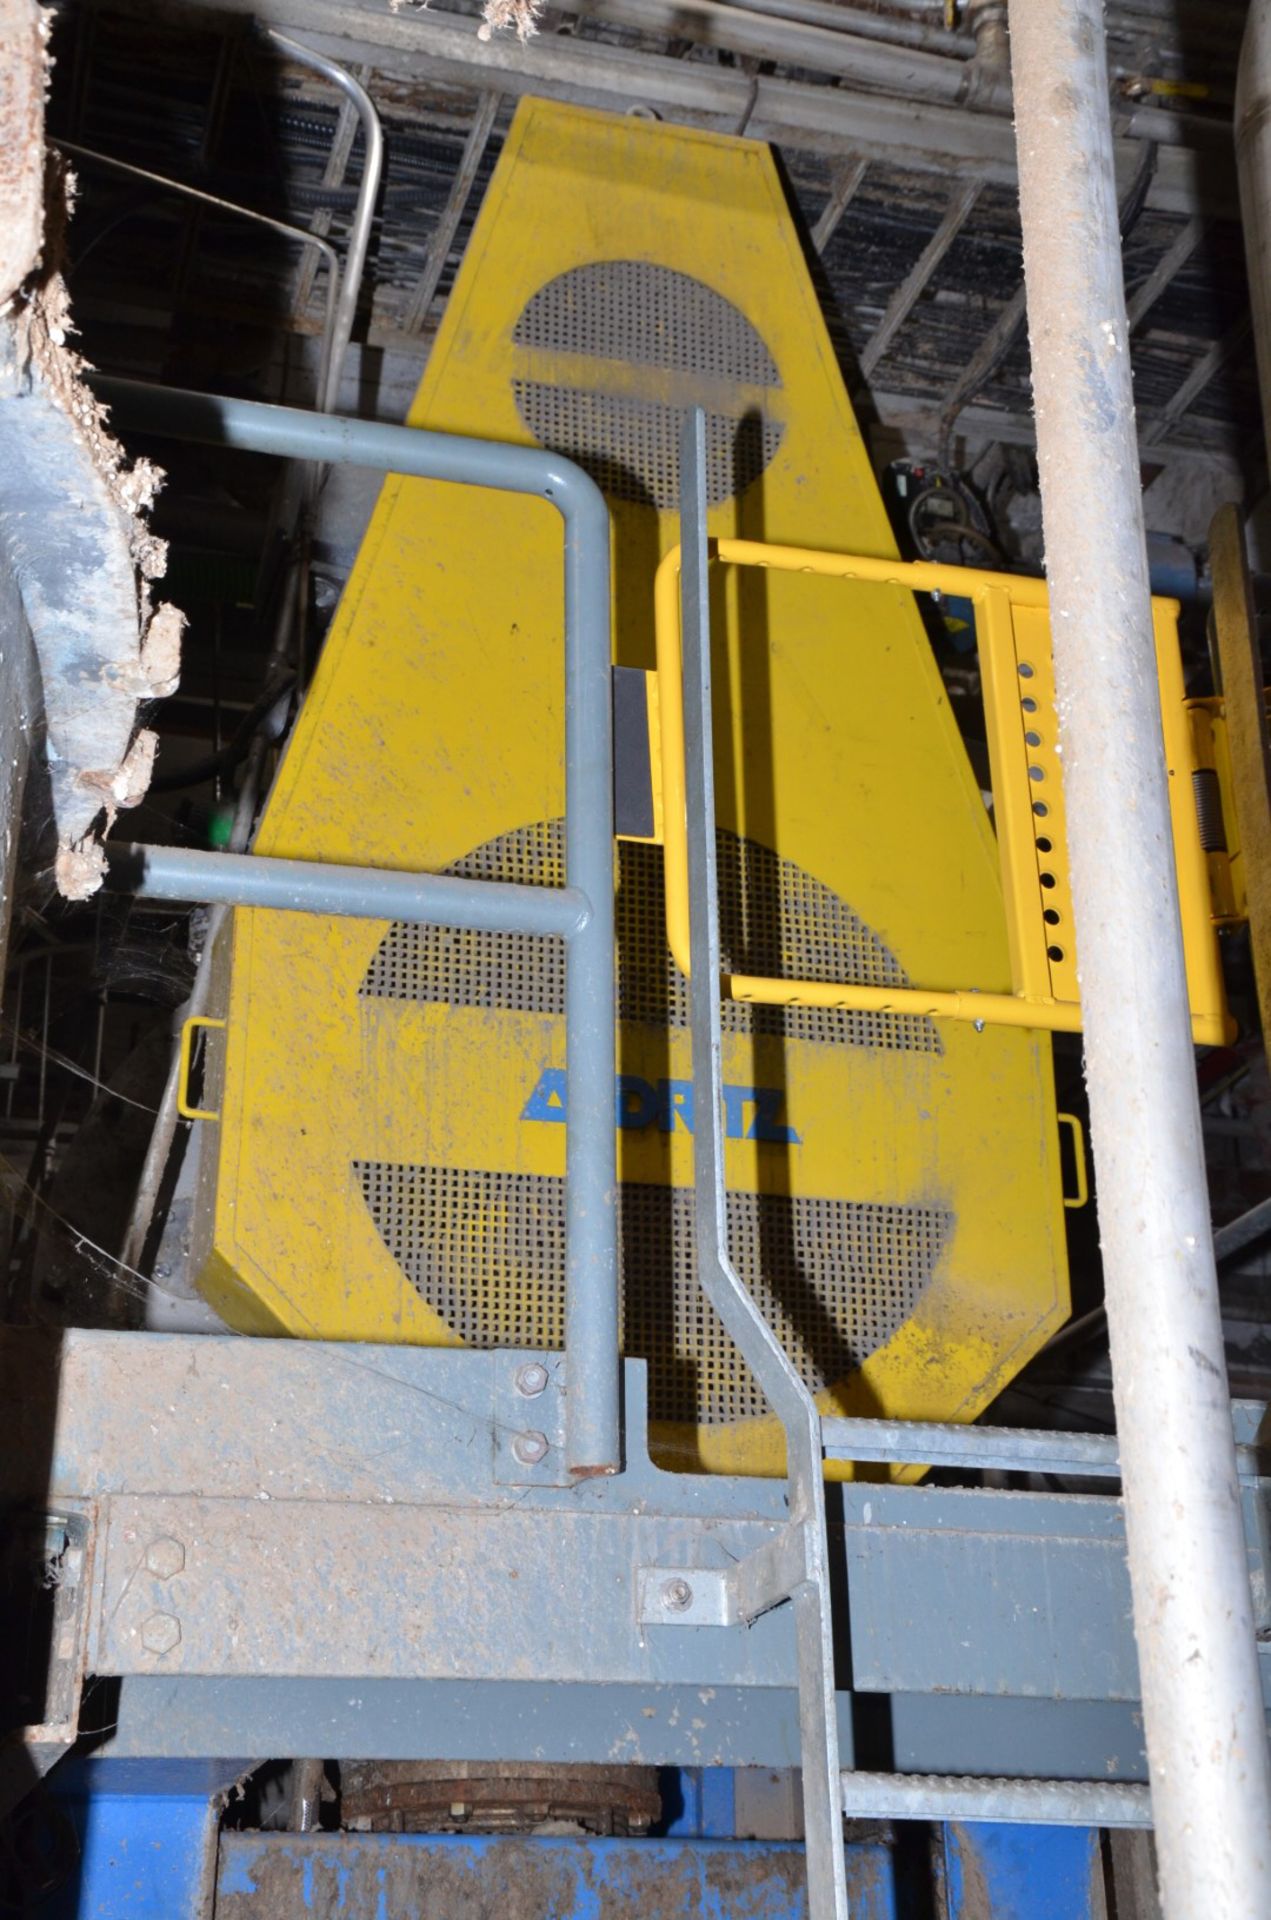 ANDRITZ (2019) MODUSCREEN T2D STAINLESS STEEL CONTINUOUSLY OPERATED SORTER WITH SIMULTANEOUS - Image 4 of 6